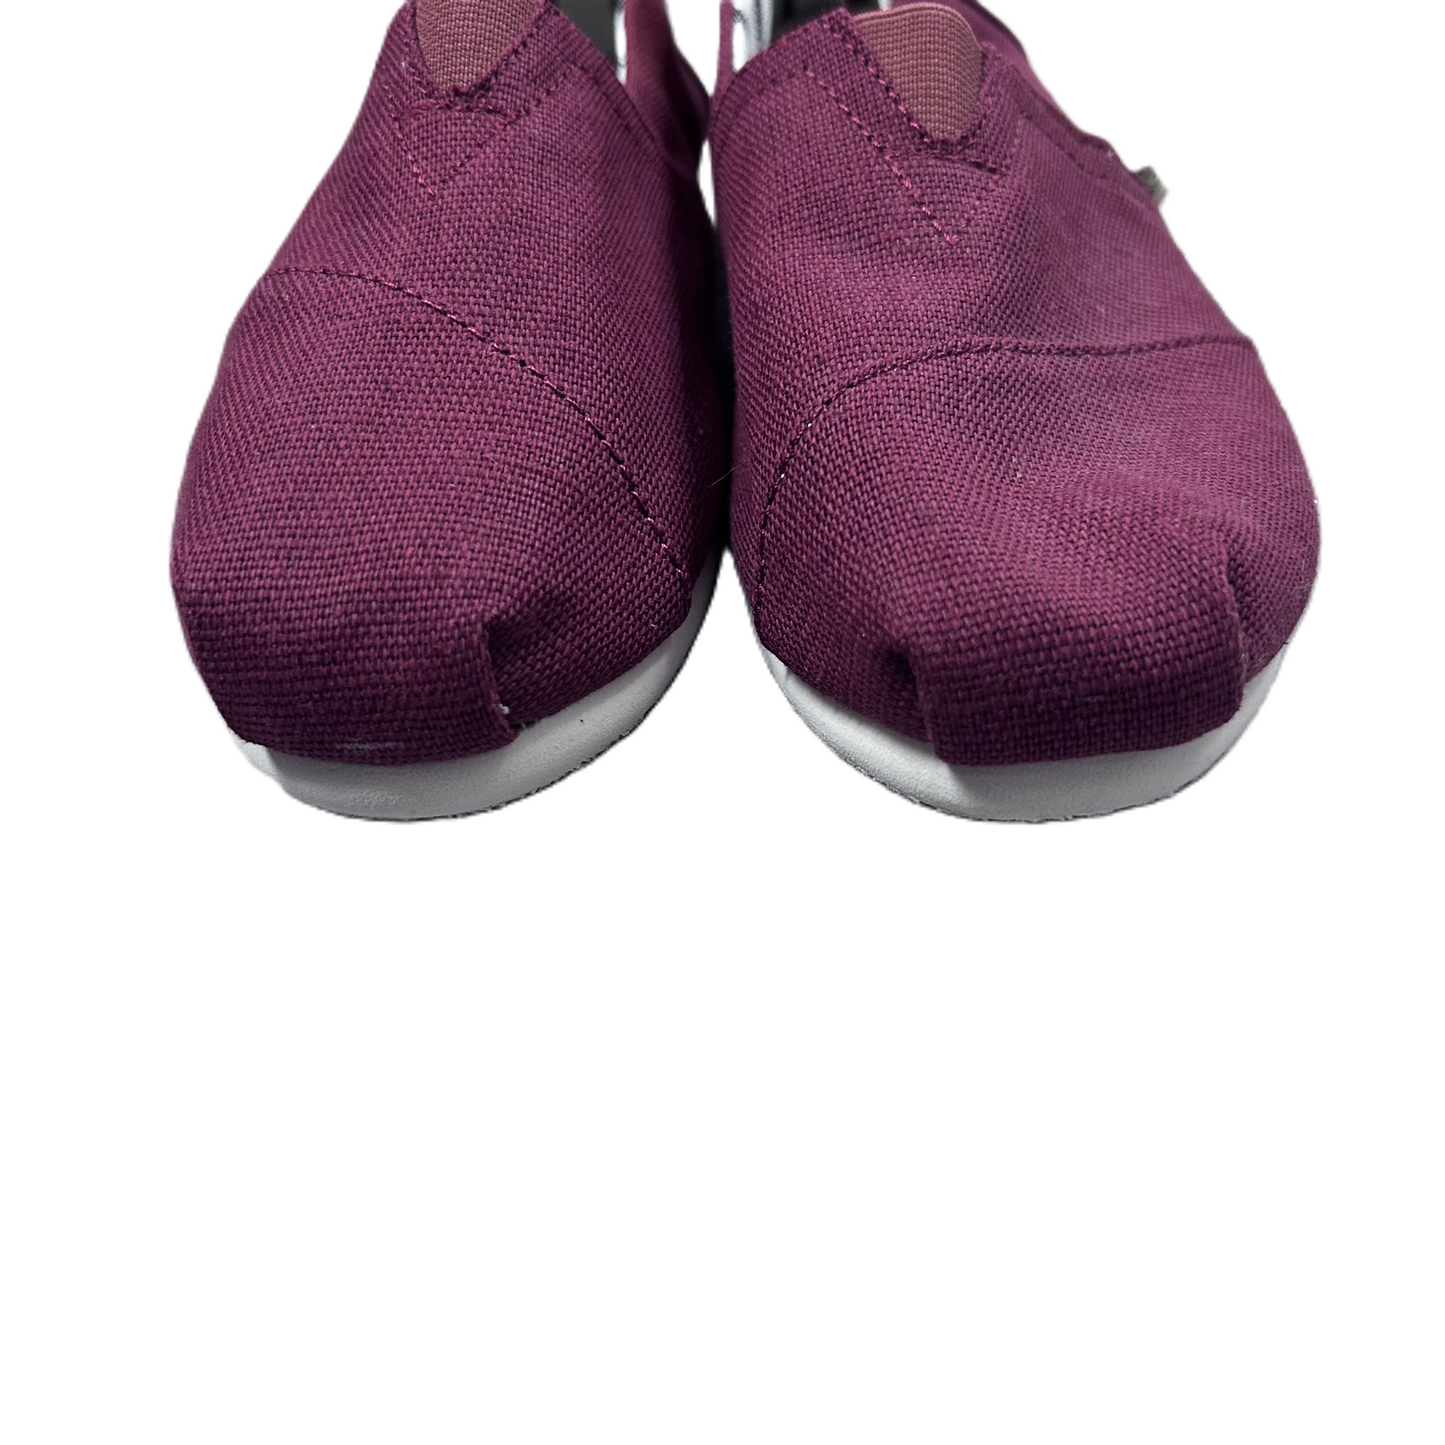 Shoes Flats Loafer Oxford By Toms  Size: 8.5